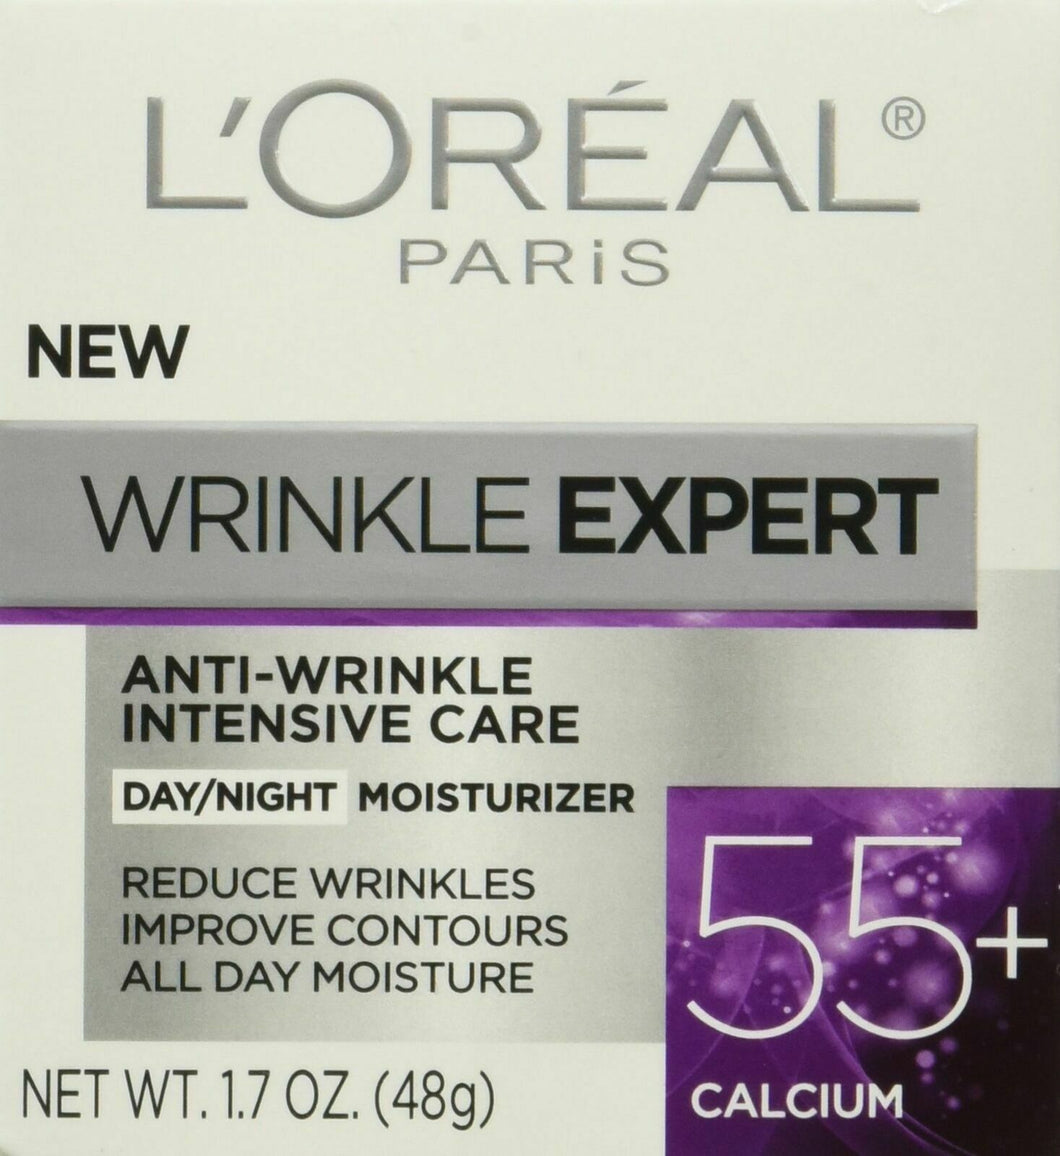 LOreal Paris Skincare Wrinkle Expert 55+ Anti-Aging Face Moisturizer with Calcium, Non-Greasy, Suitable for Sensitive Skin, 1.7 fl. oz